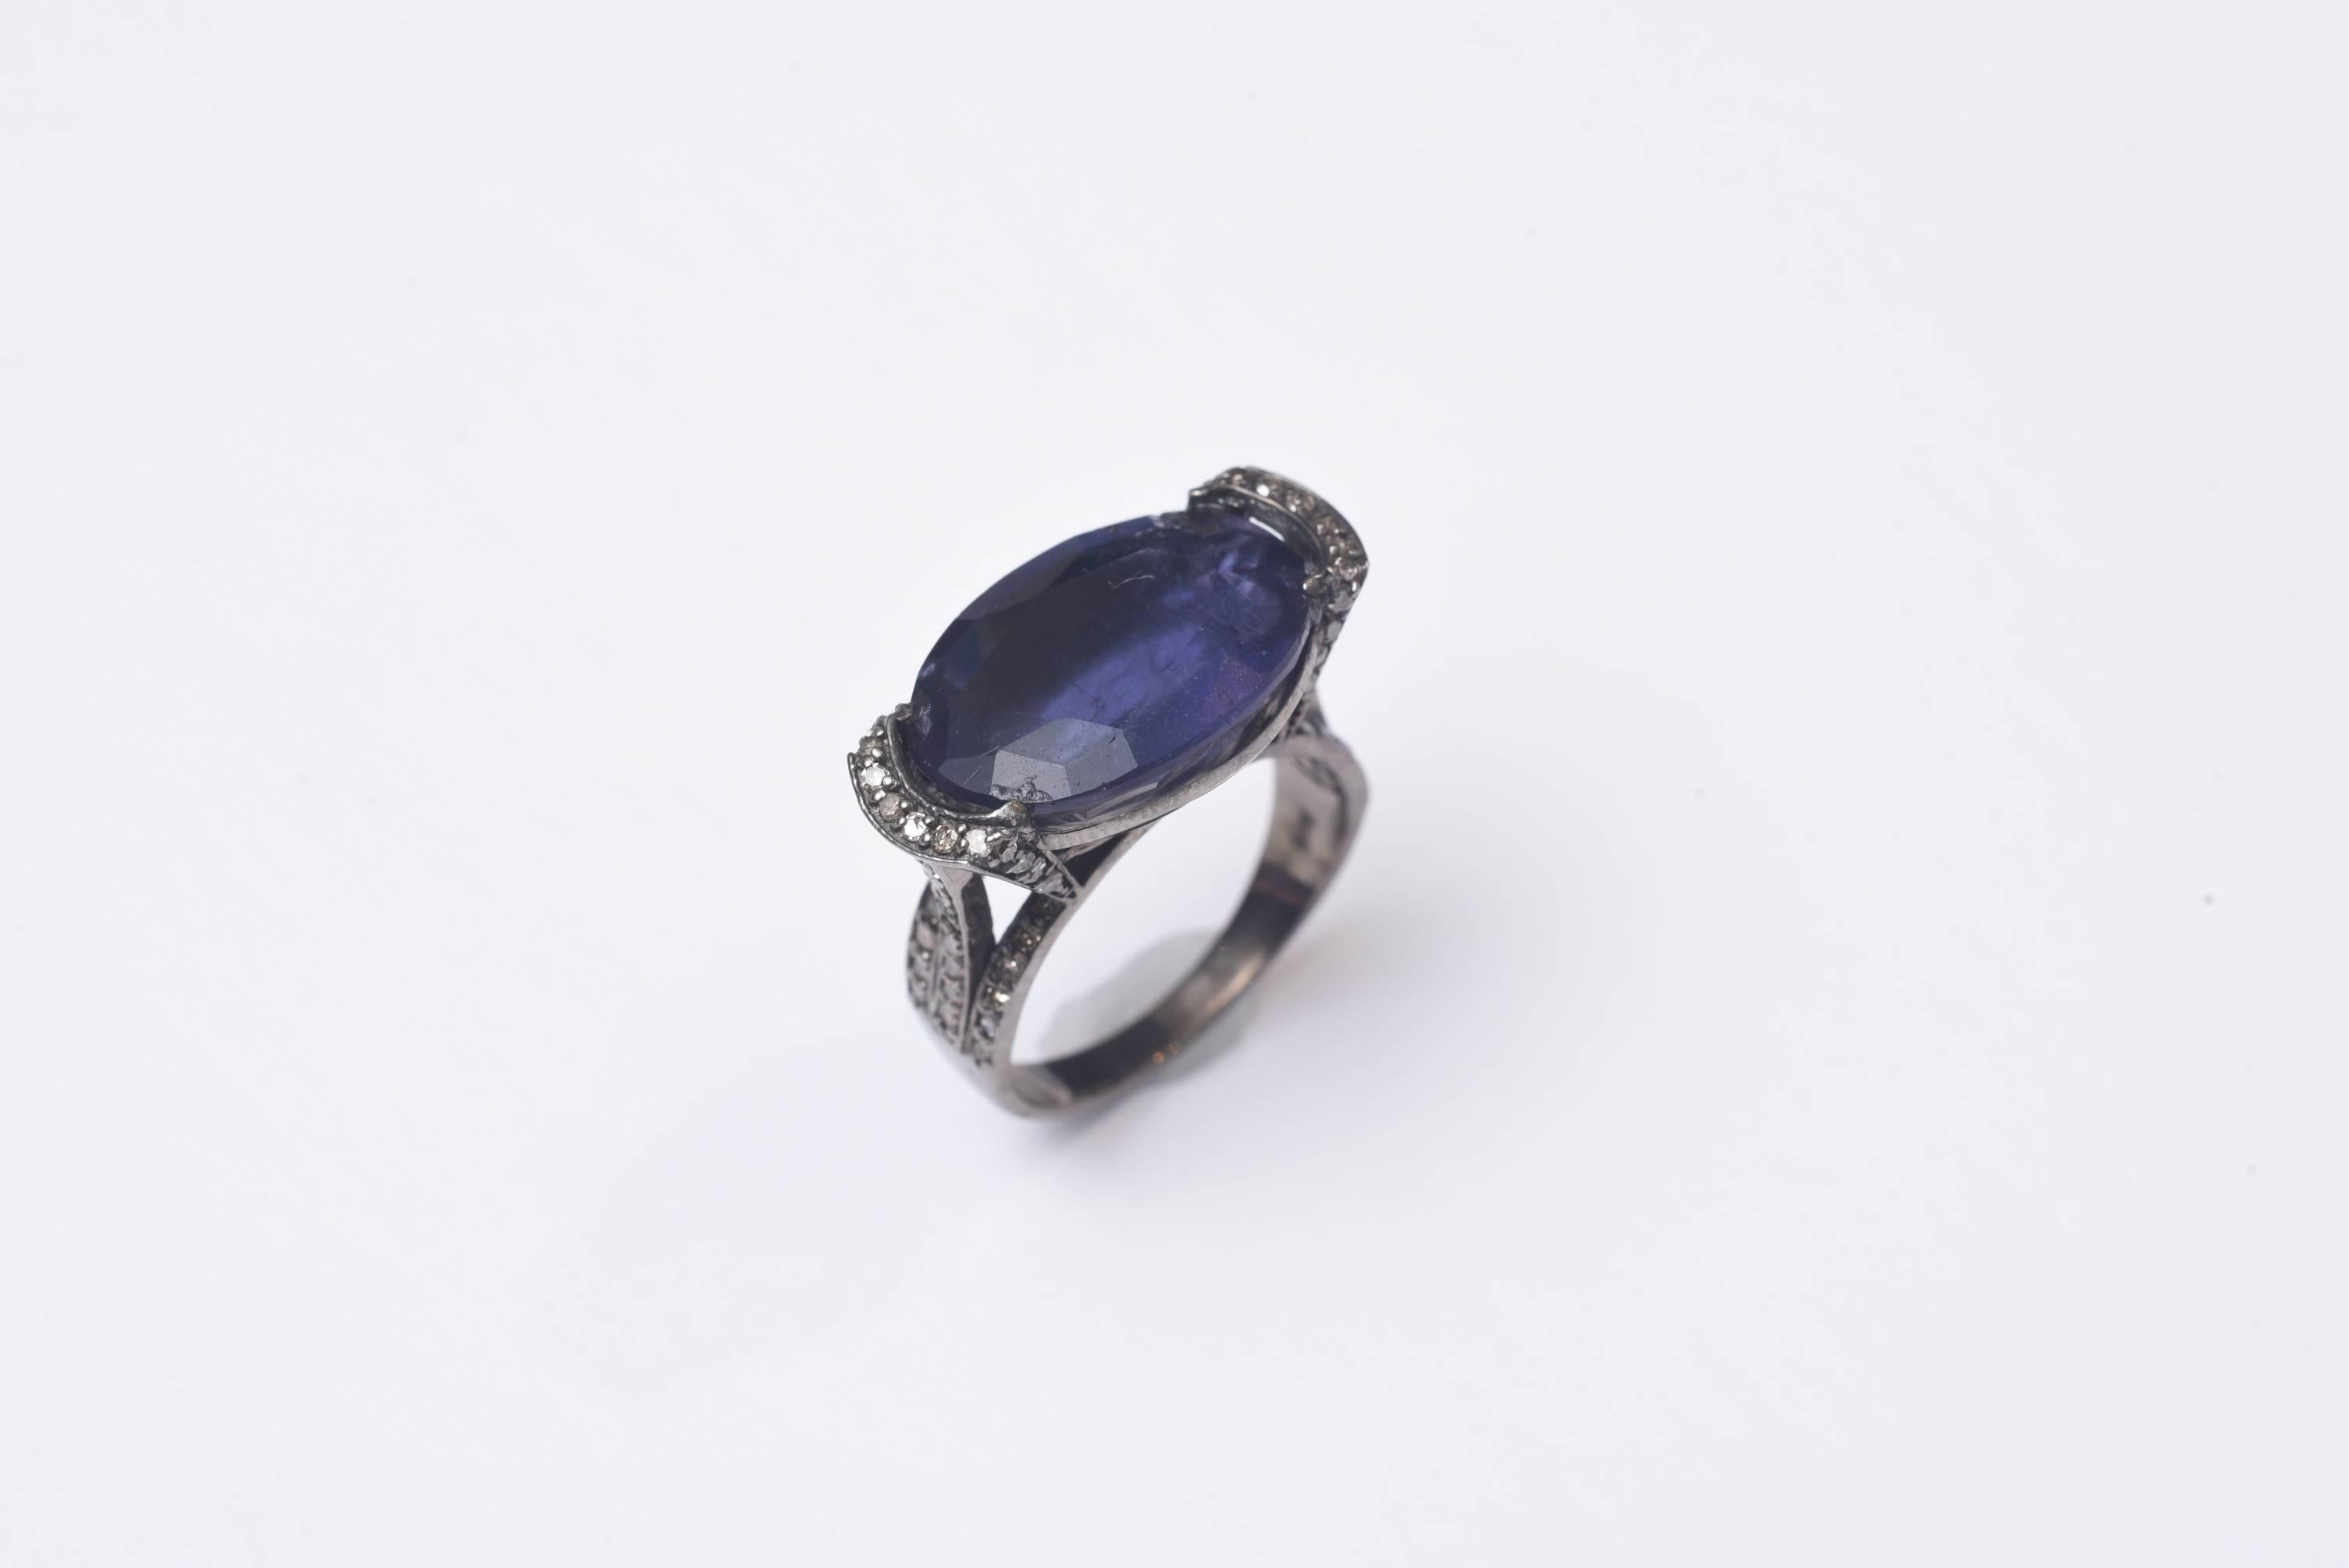 Large faceted iolite ring with pave` set diamonds on the sides as well as along the sides of the prongs and top of the band. Set in oxidized sterling.  Carat weight of iolite is 10.60 diamonds are .56 carats.  Ring size is 7.75.